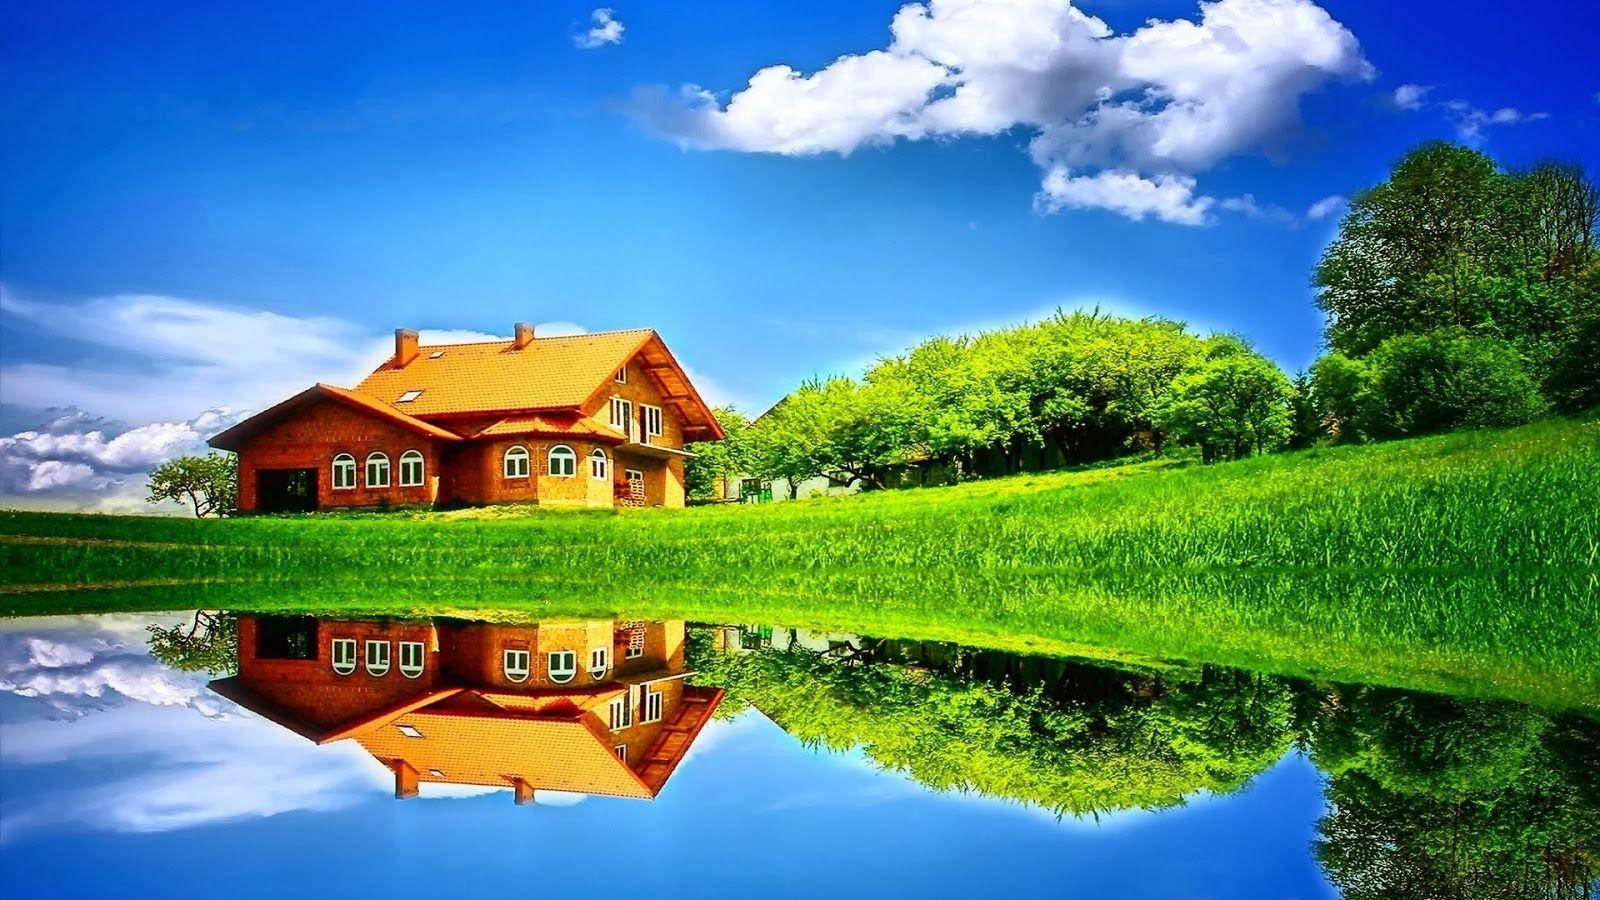 1080p Hd Cottage By The Lake Wallpaper